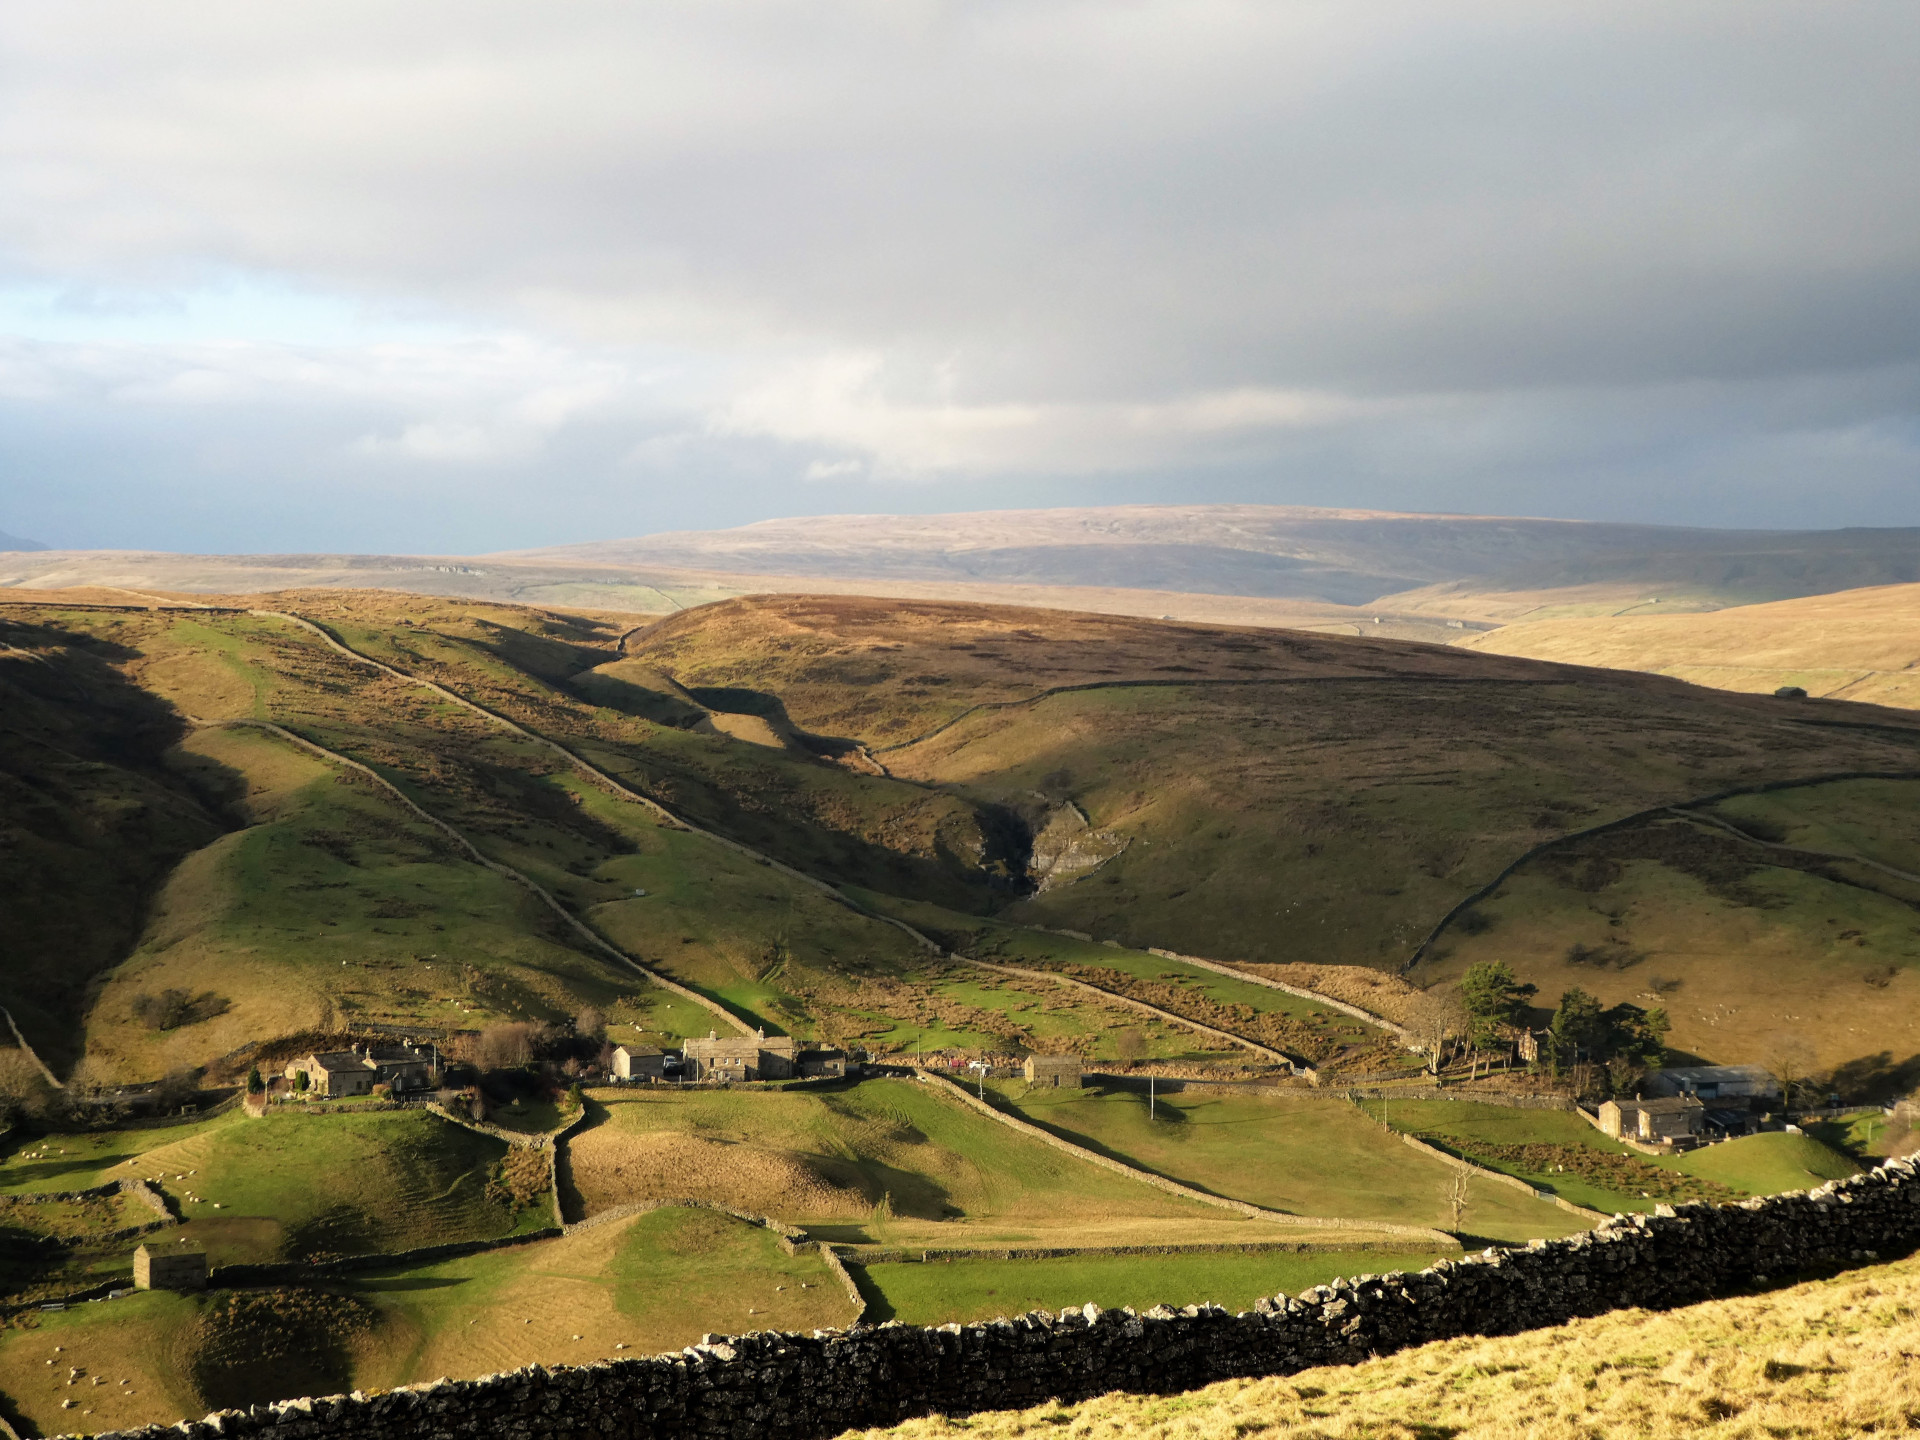 Driving through Swaledale, you can admire the rolling farmland and small communities.<p><a href="https://www.msn.com/en-us/community/channel/vid-7xx8mnucu55yw63we9va2gwr7uihbxwc68fxqp25x6tg4ftibpra?cvid=94631541bc0f4f89bfd59158d696ad7e">Follow us and access great exclusive content every day</a></p>